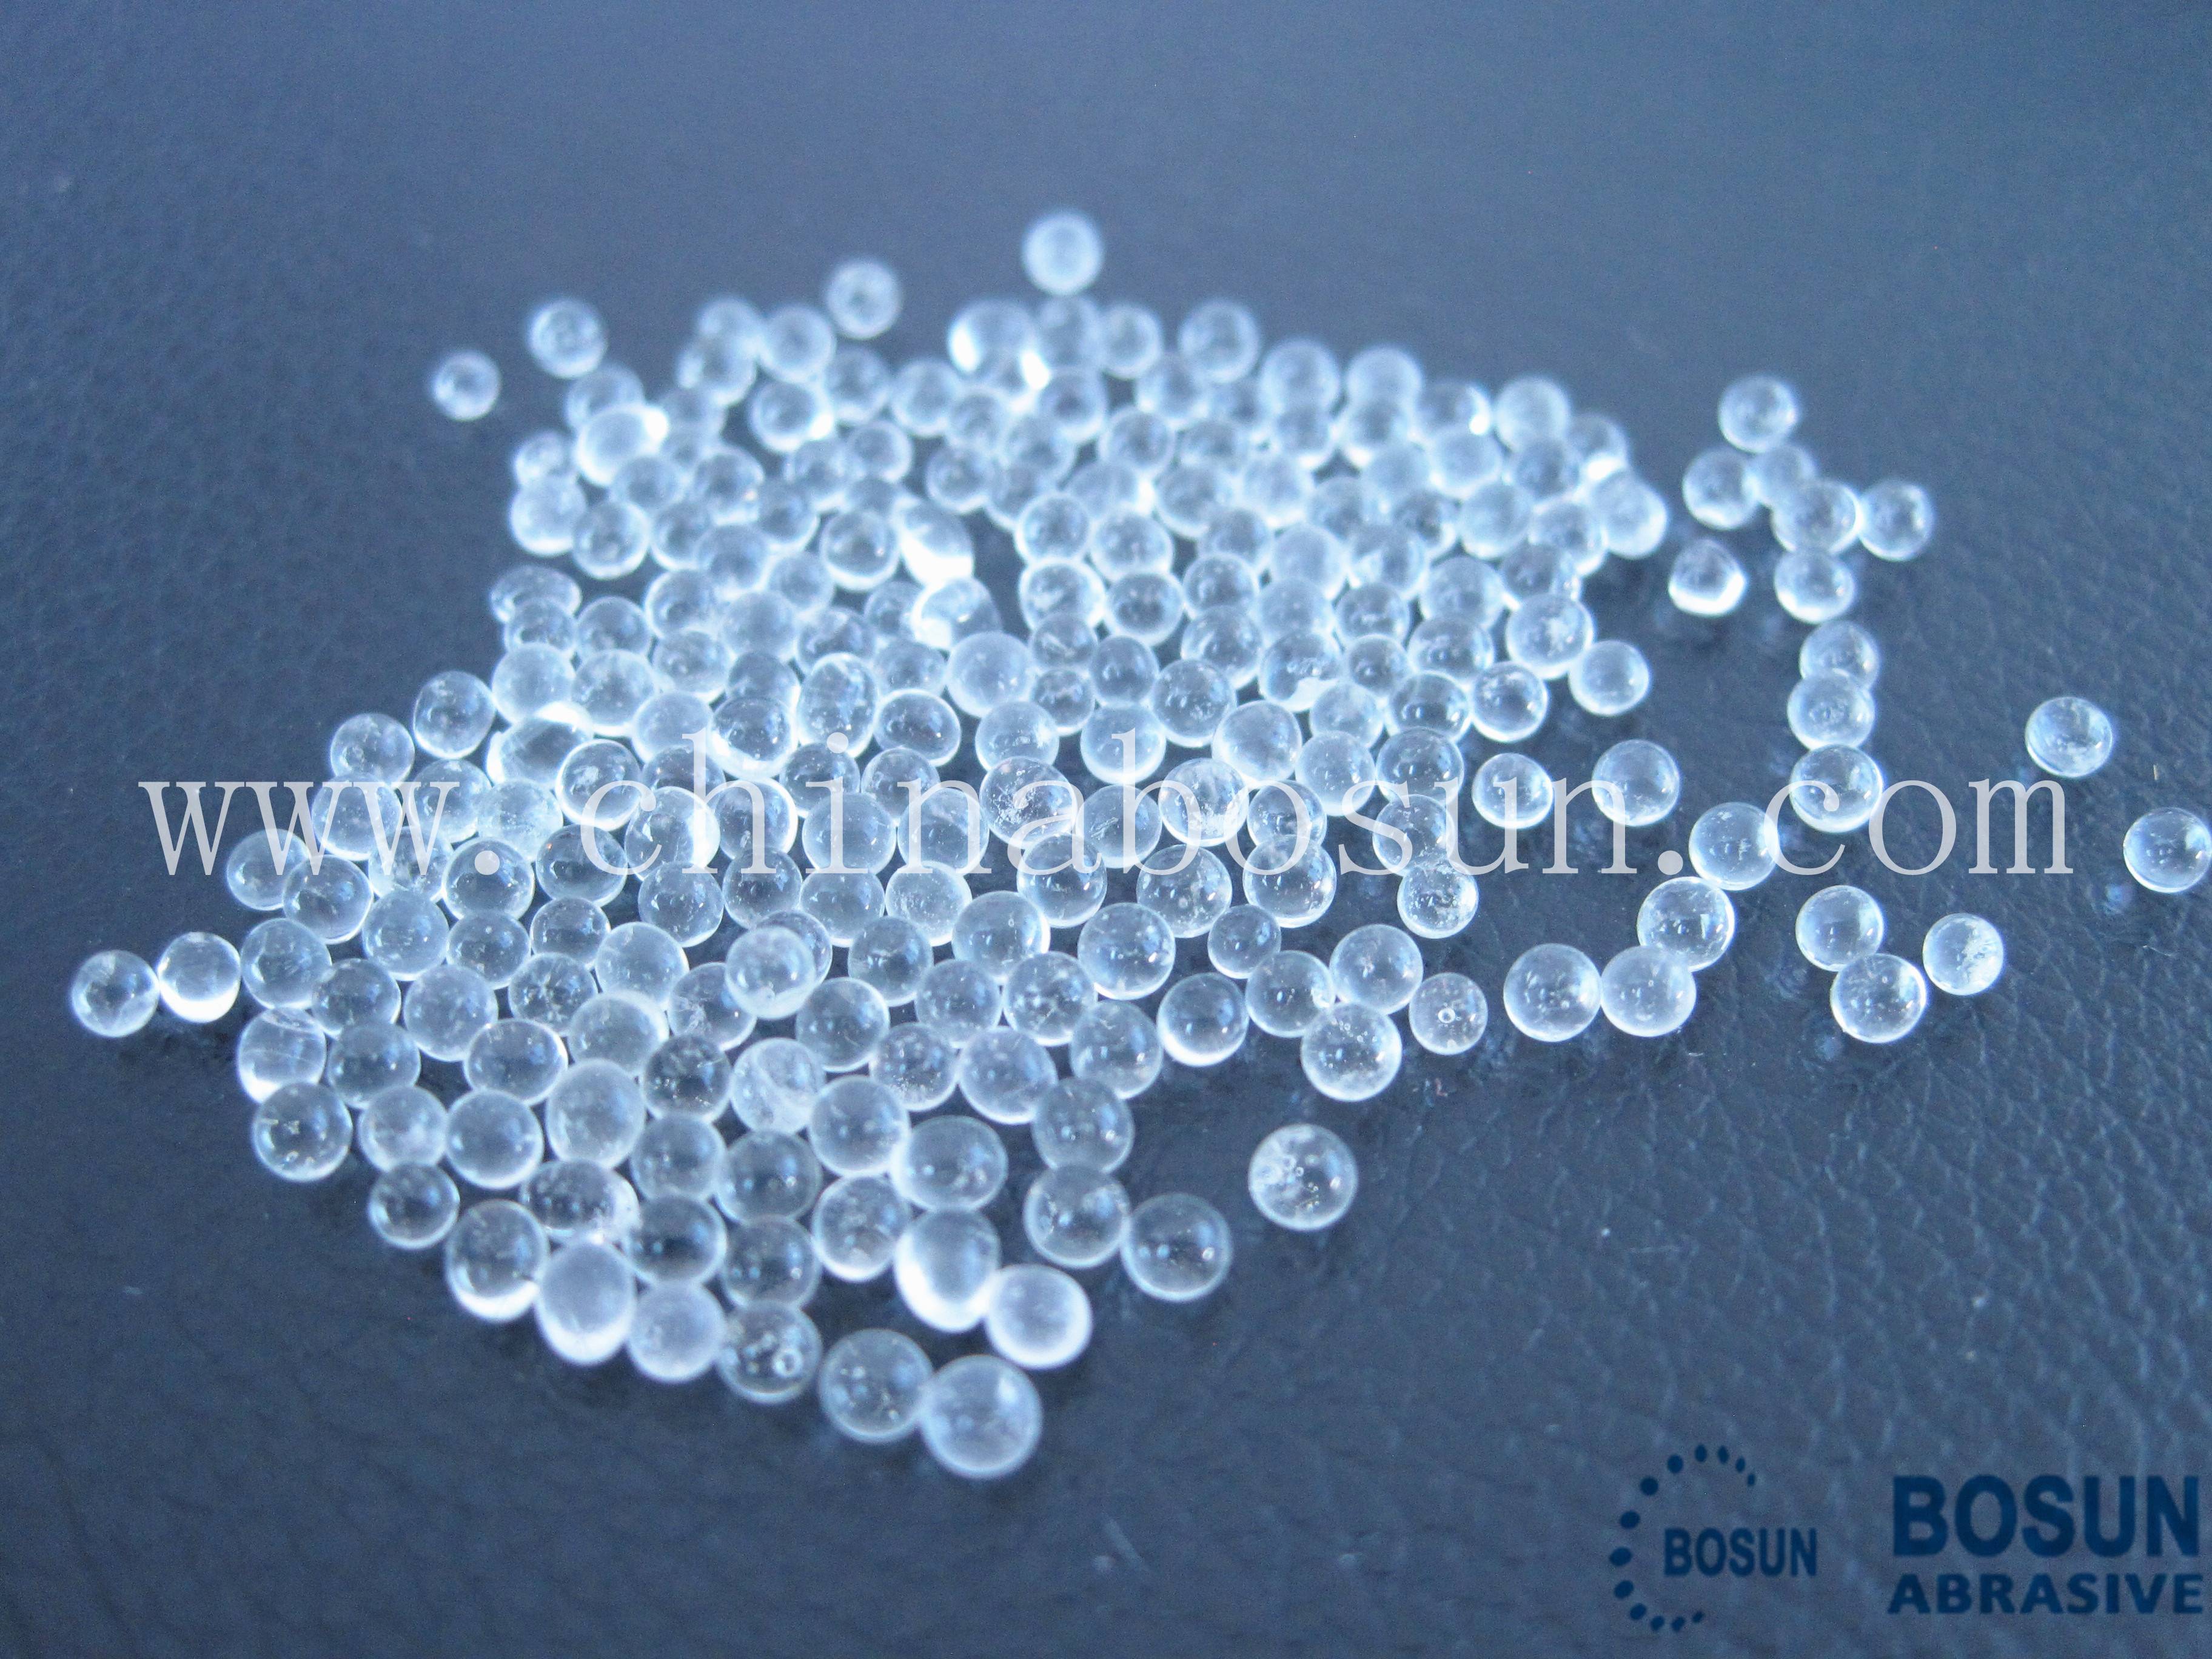 Wholesale PriceList for Glass Beads 2-2.5MM to Toronto Manufacturer